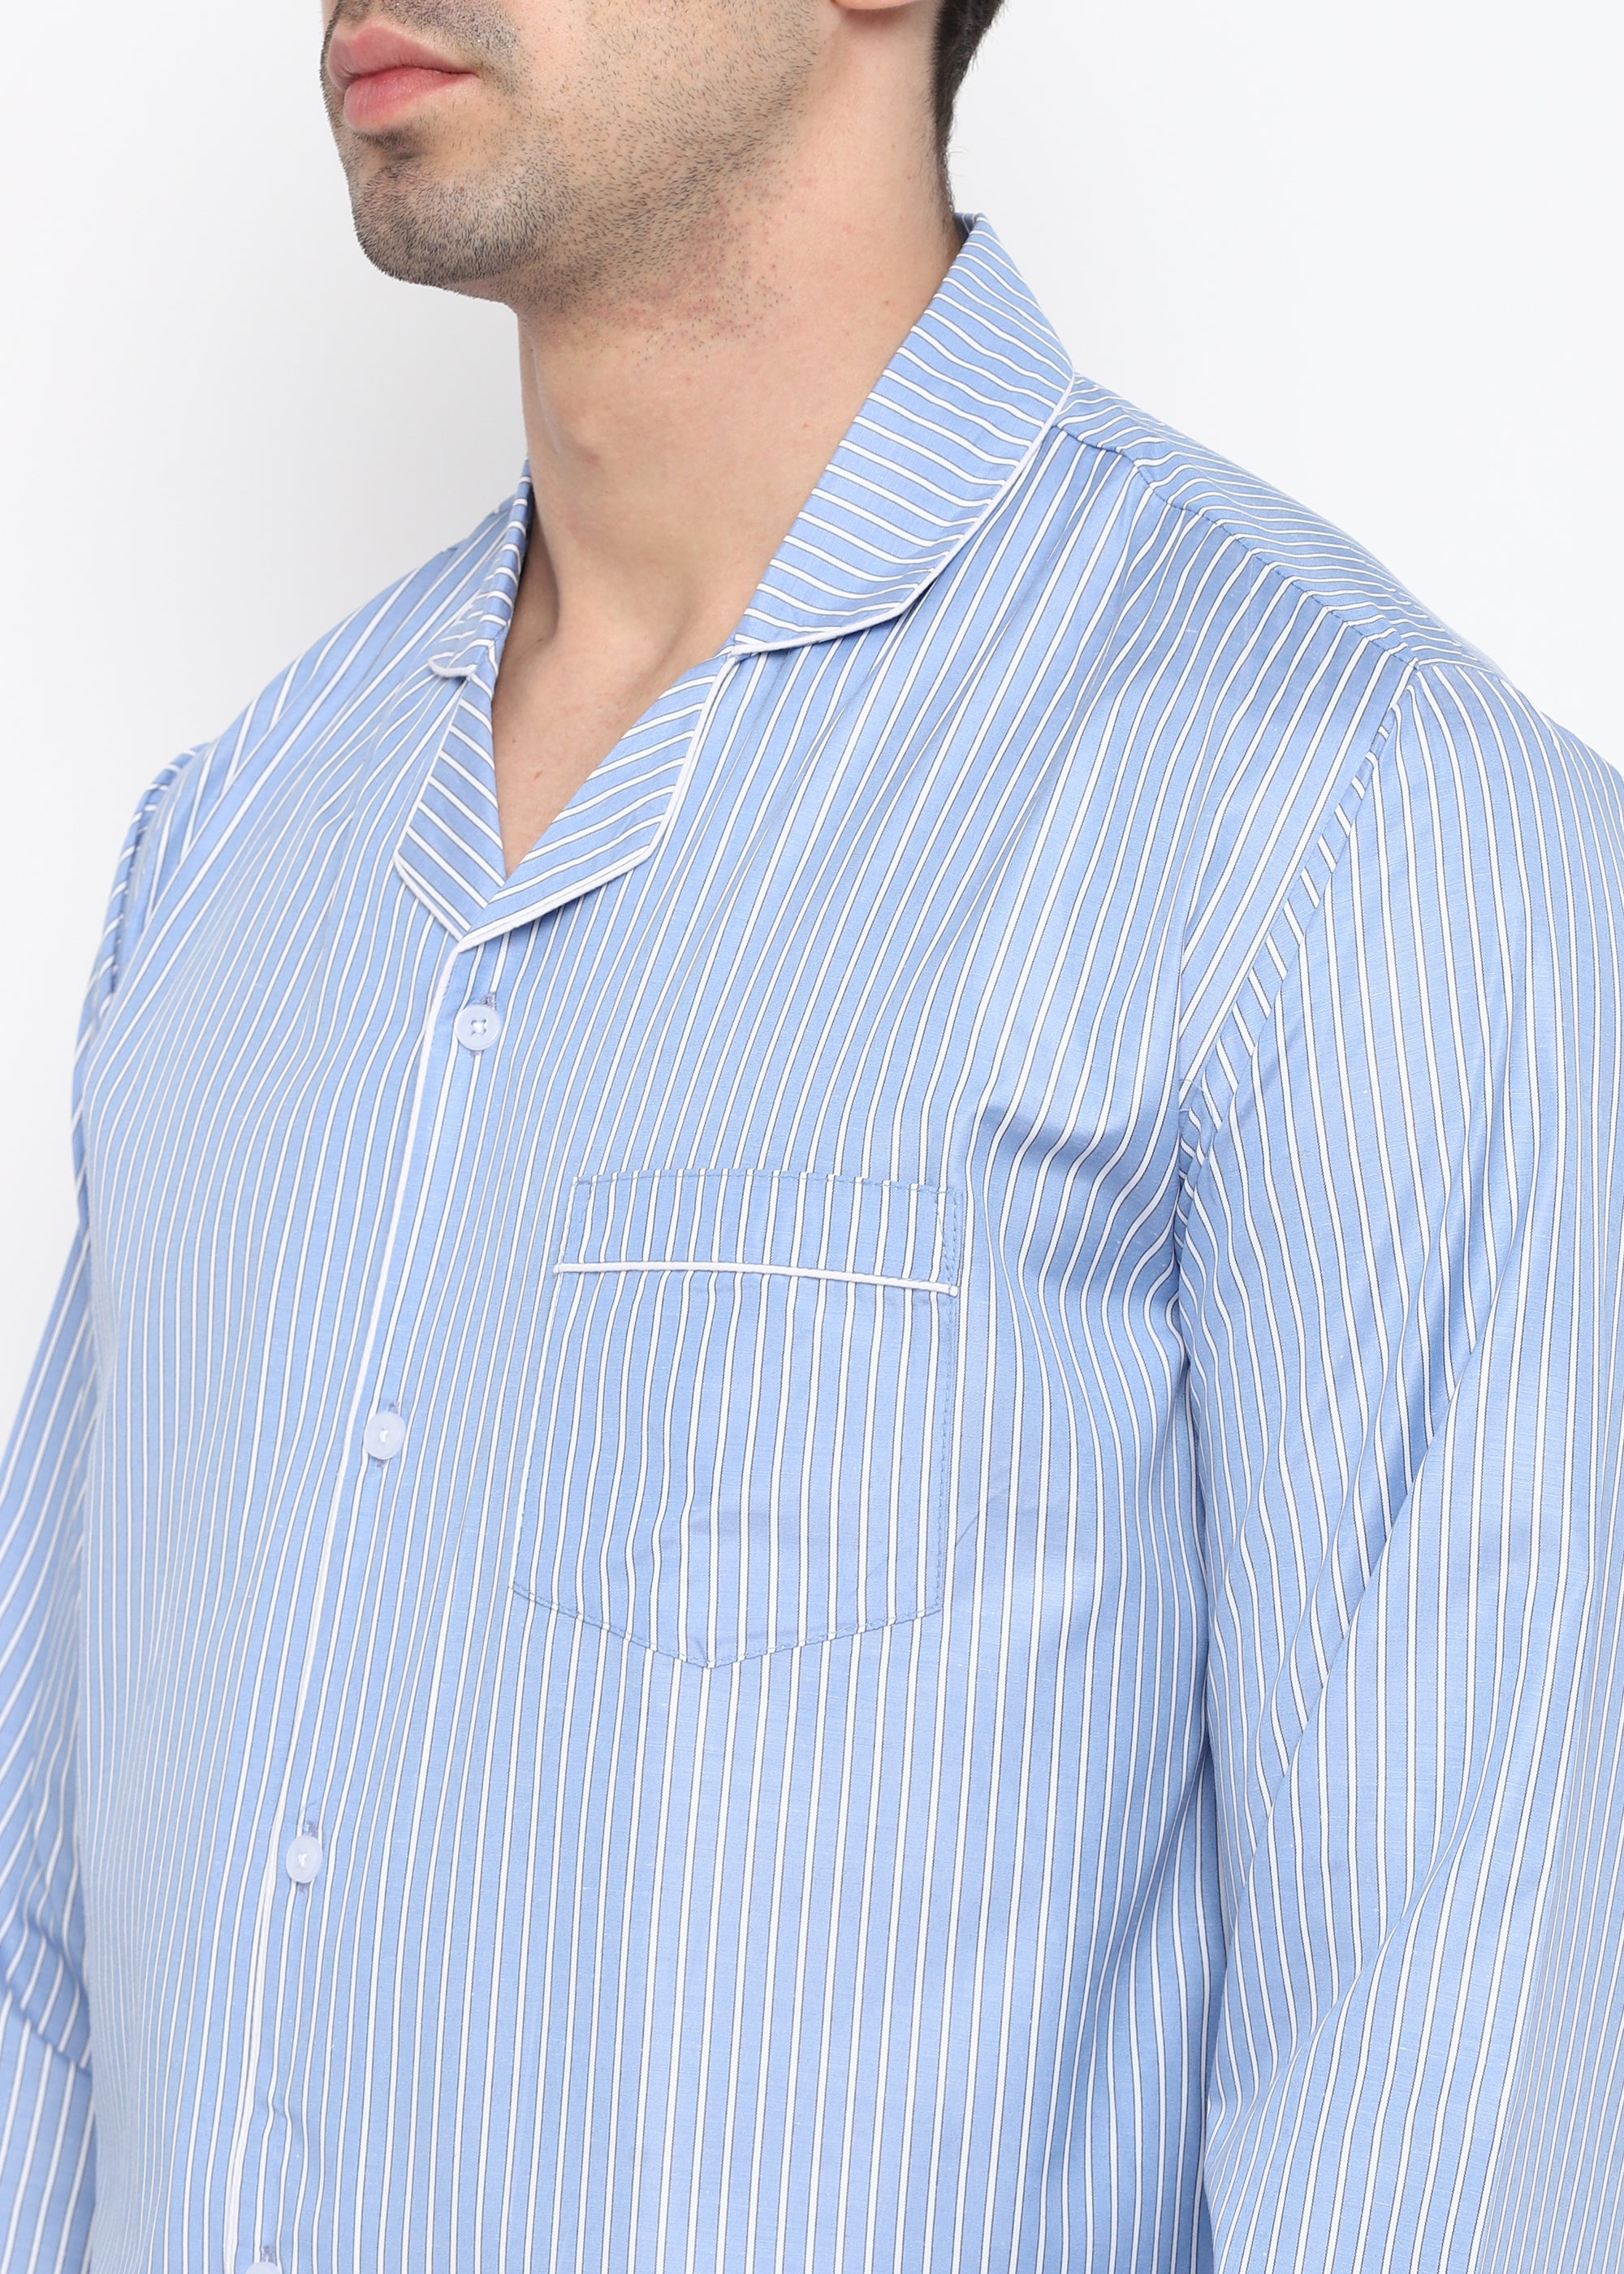 Hazy blue and white stripes long sleeve men's night suit